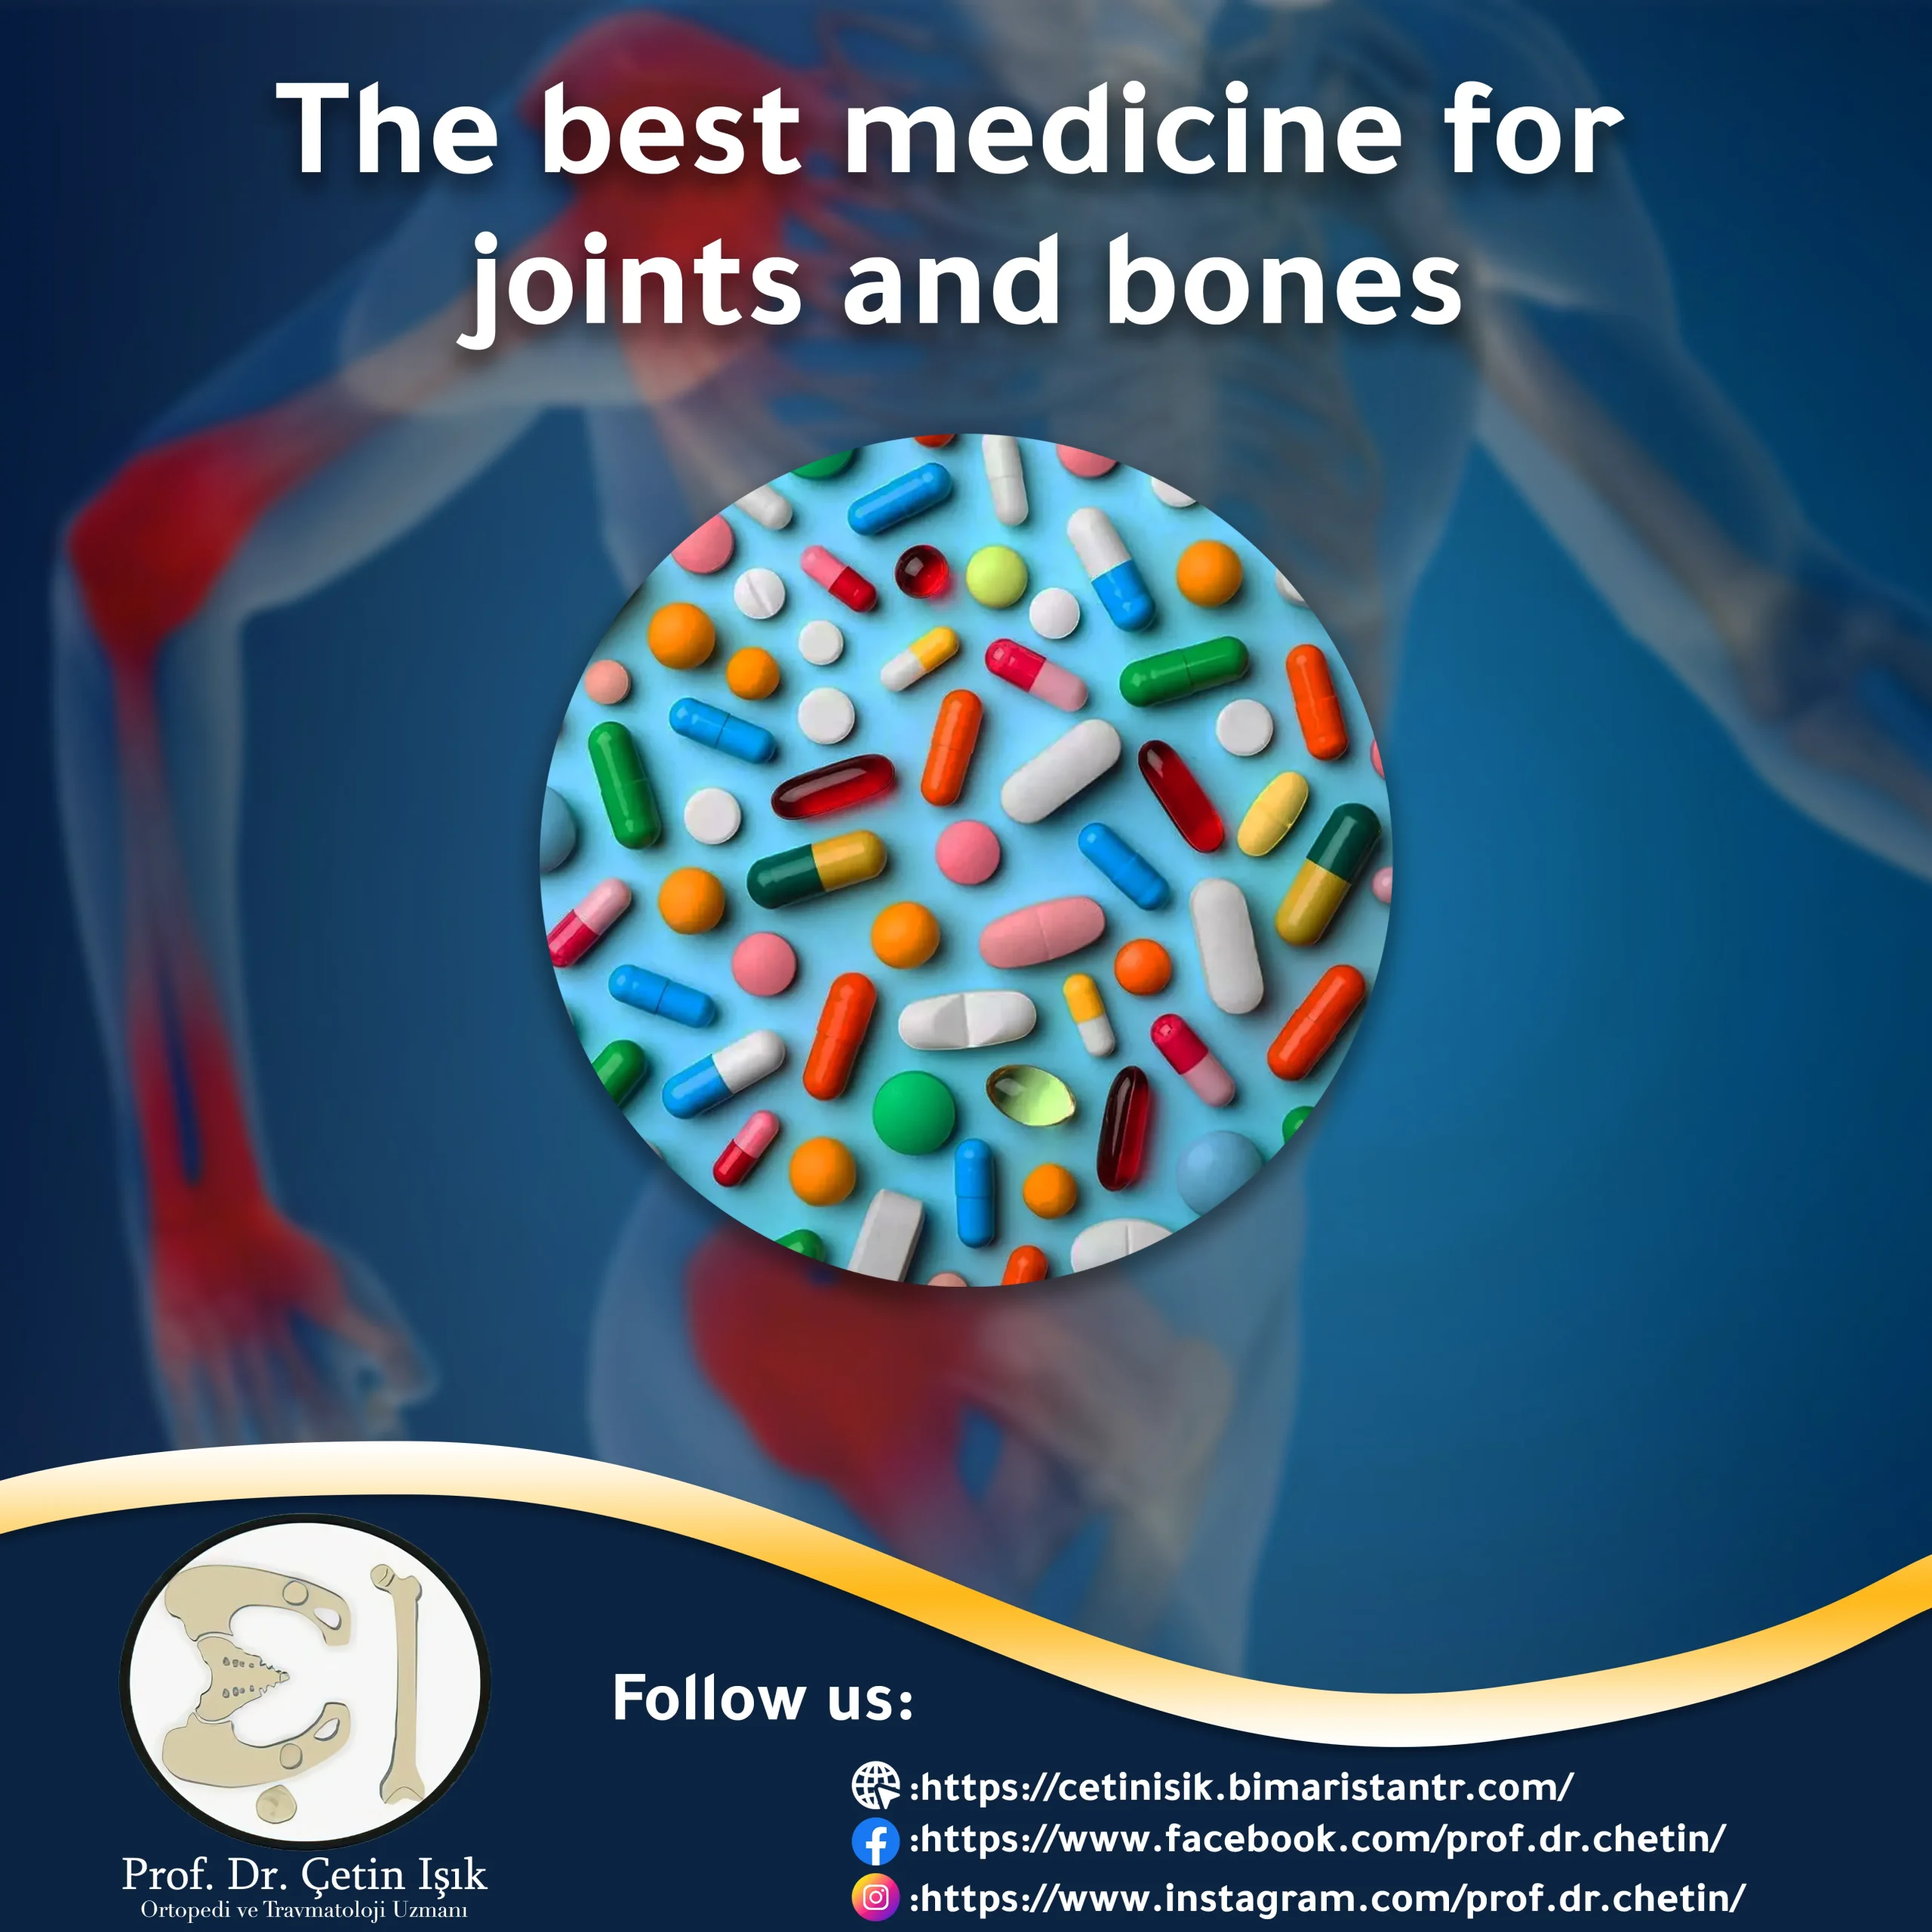 The best medicine for joints and bones discovered by medicine